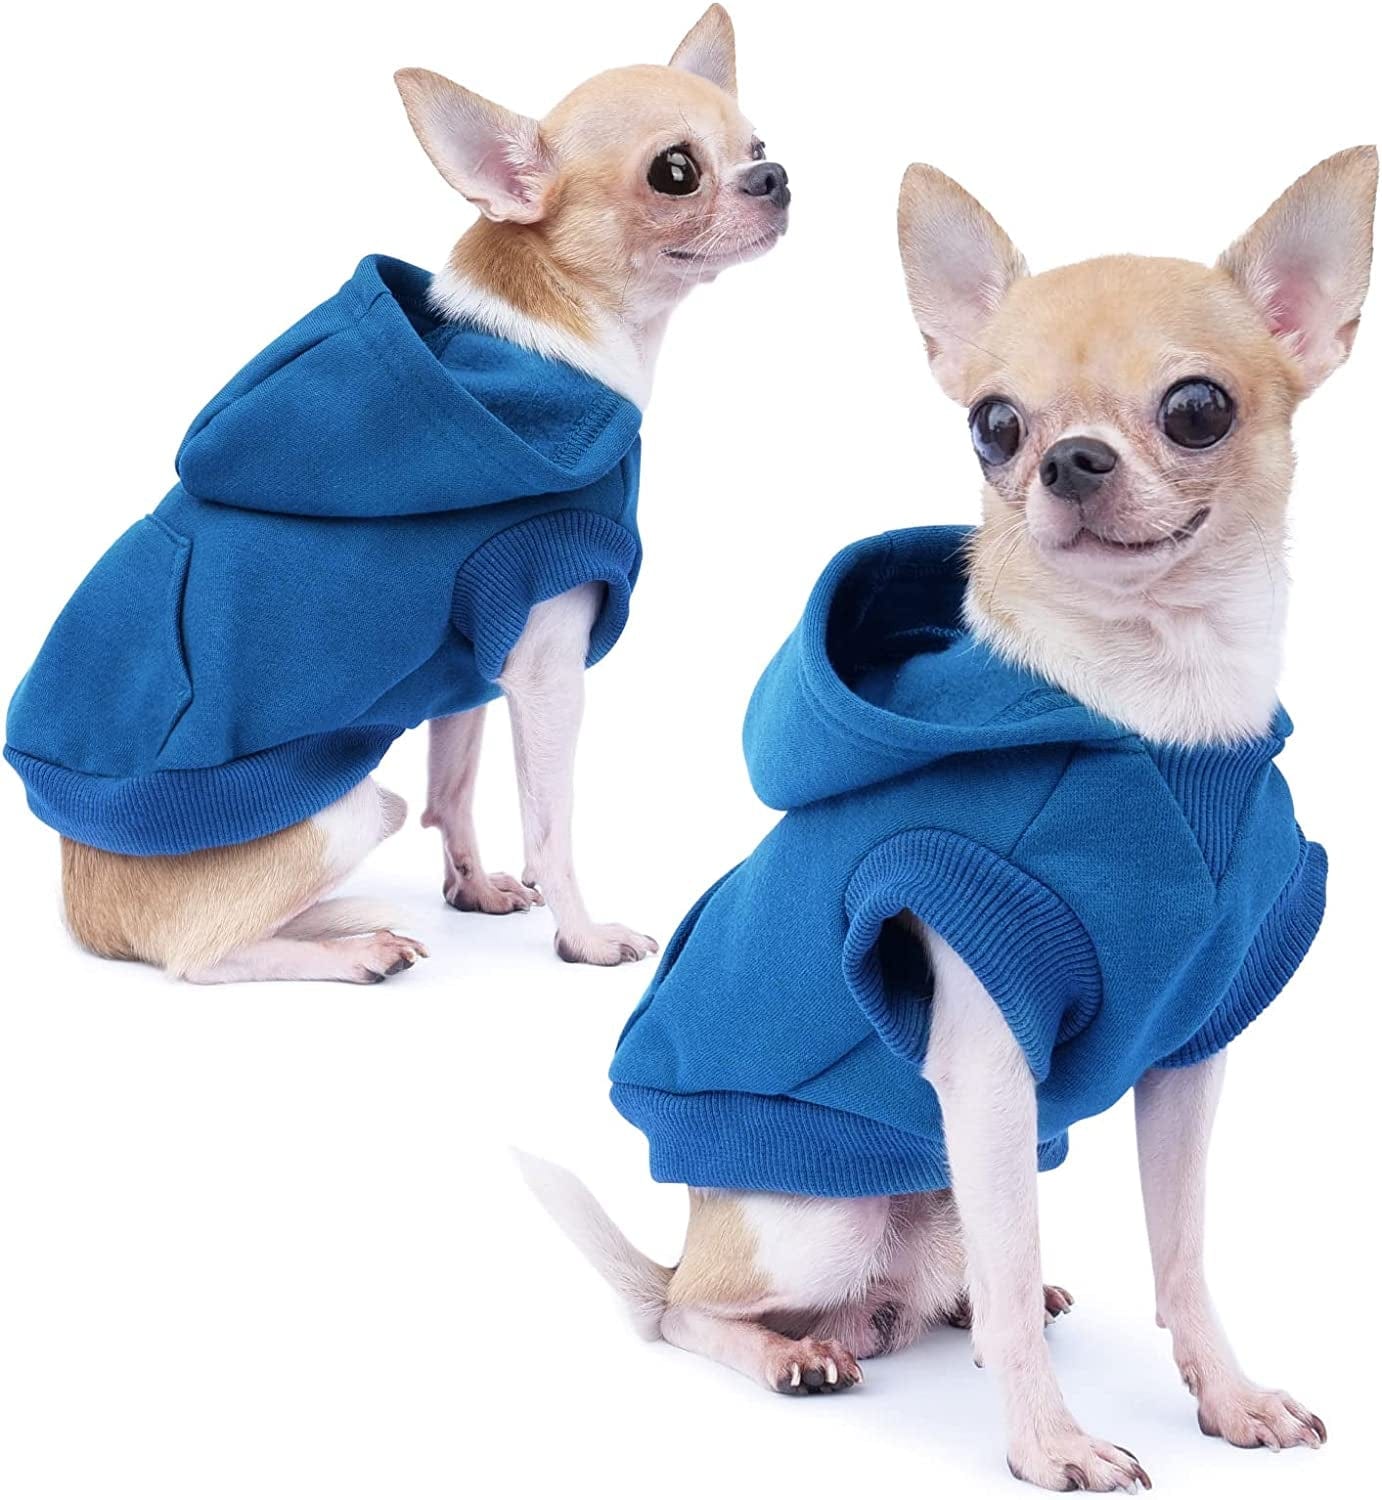 𝐍𝐄𝐖 𝐀𝐑𝐑𝐈𝐕𝐀𝐋 Frienperro Dog Clothes for Small Dogs Girl Boy, 100% Cotton Buffalo Plaid Small Dog Hoodie, Chihuahua Clothes Pet Cat Winter Warm Sweatshirt Sweater, Teacup Yorkie Puppy Coat Animals & Pet Supplies > Pet Supplies > Dog Supplies > Dog Apparel Frienperro Blue X-Small 